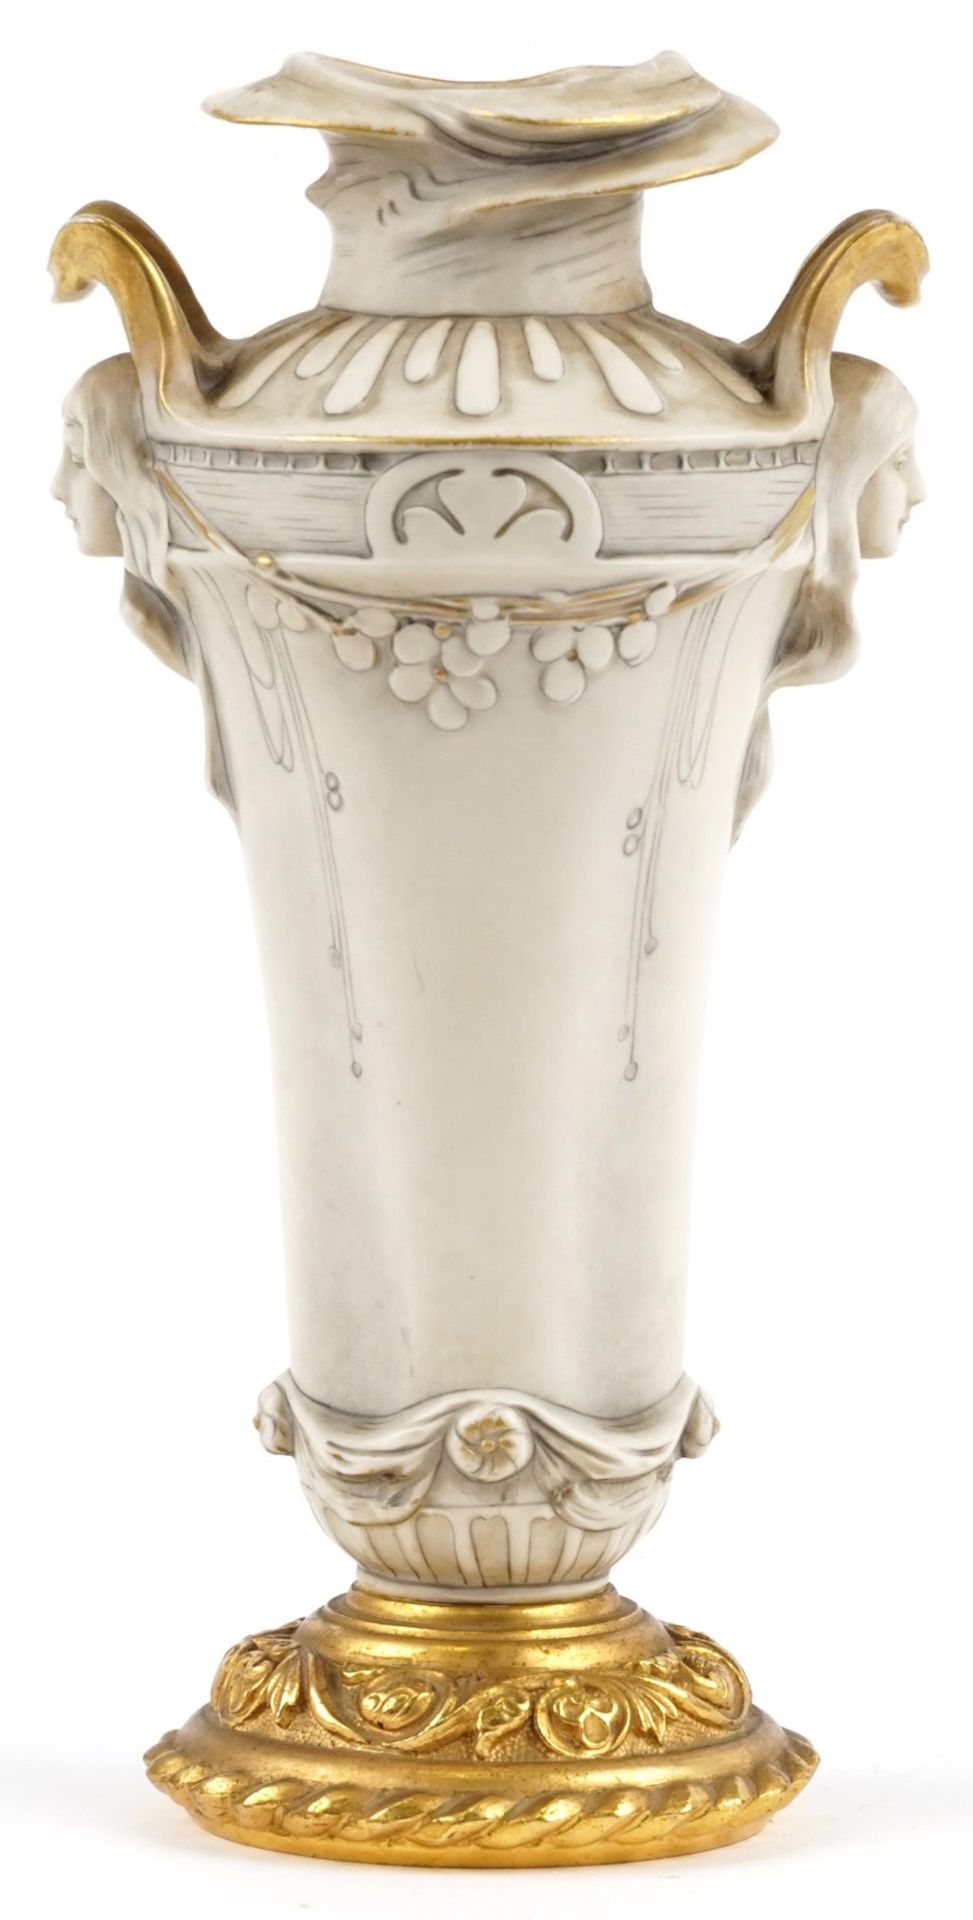 Manner of Royal Vienna, European Art Nouveau porcelain vase with gilt metal base and twin maiden - Image 2 of 4